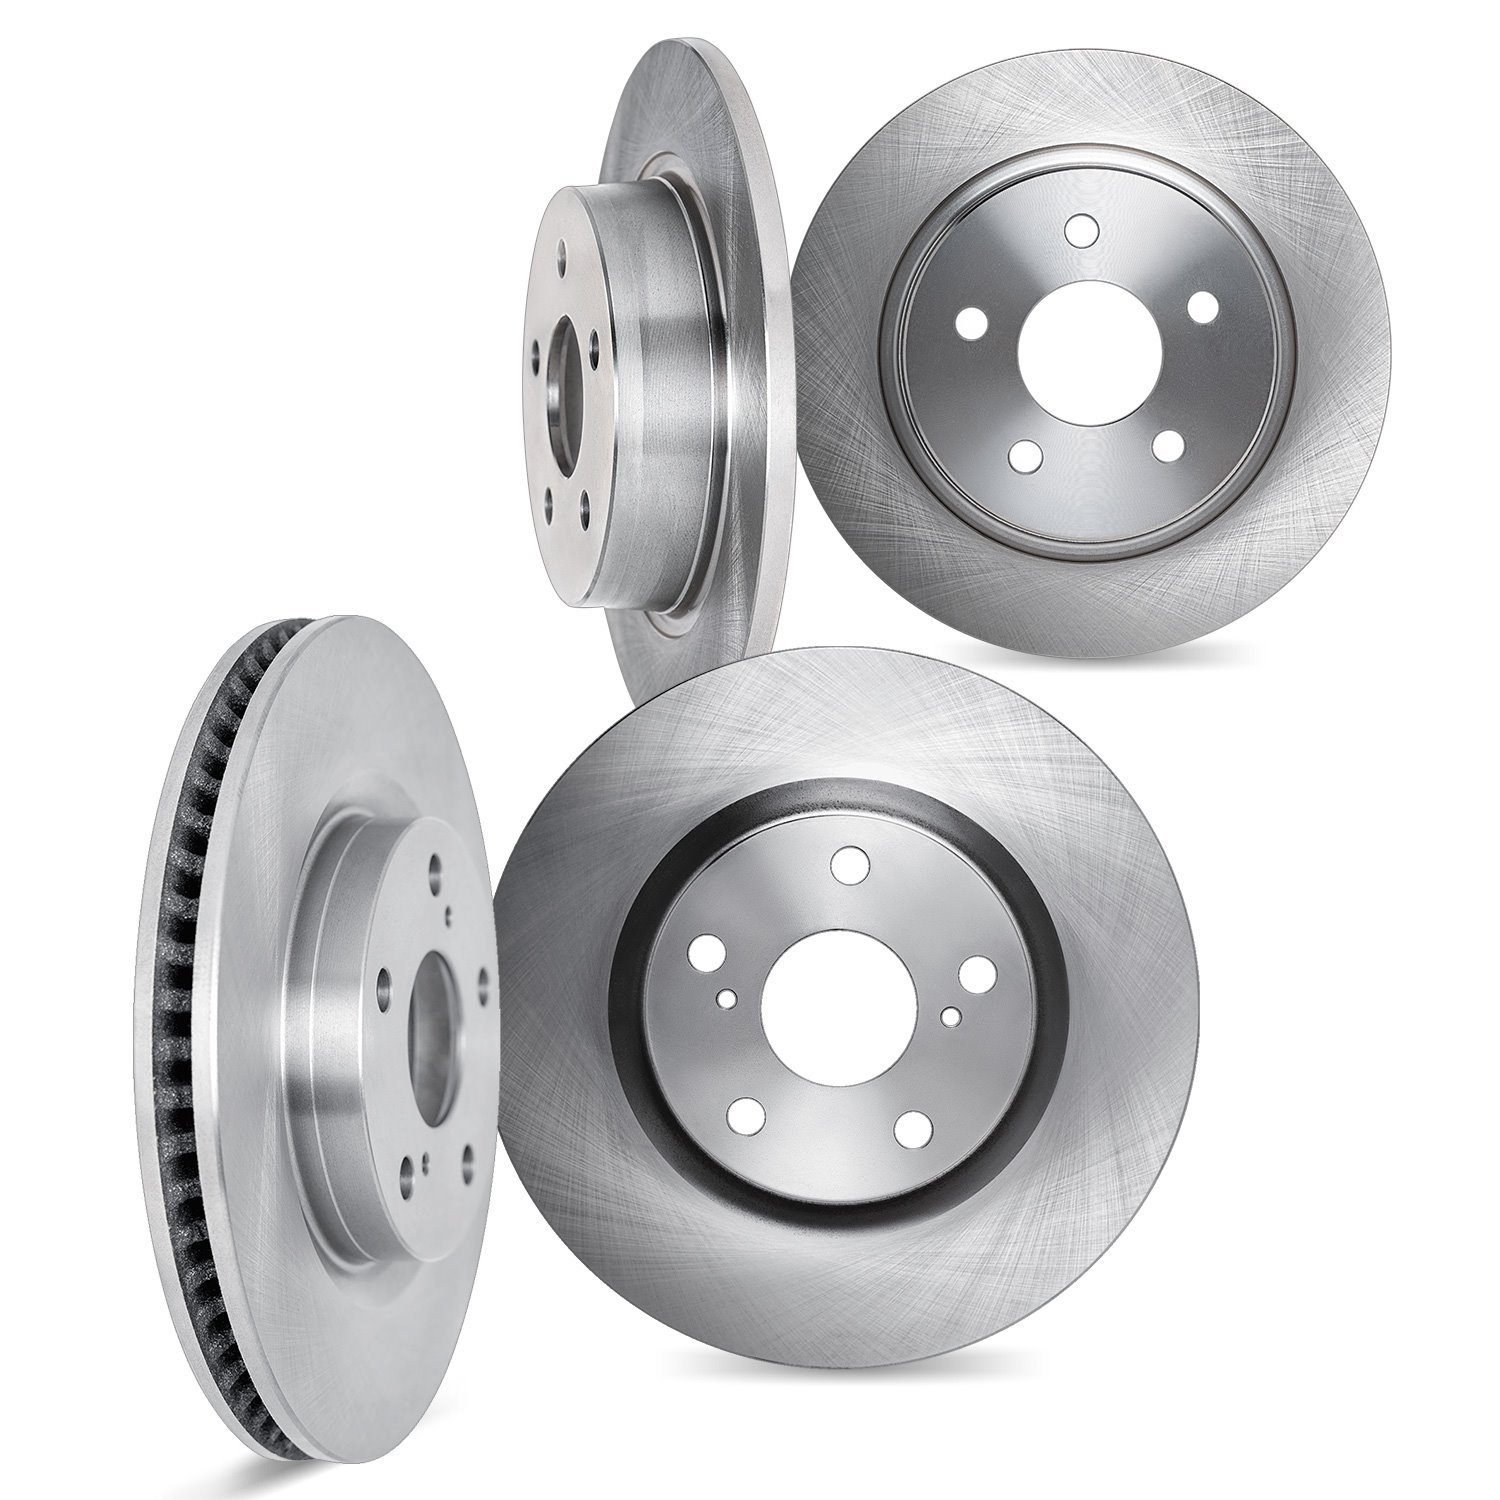 6004-42005 Brake Rotors, Fits Select Mopar, Position: Front and Rear